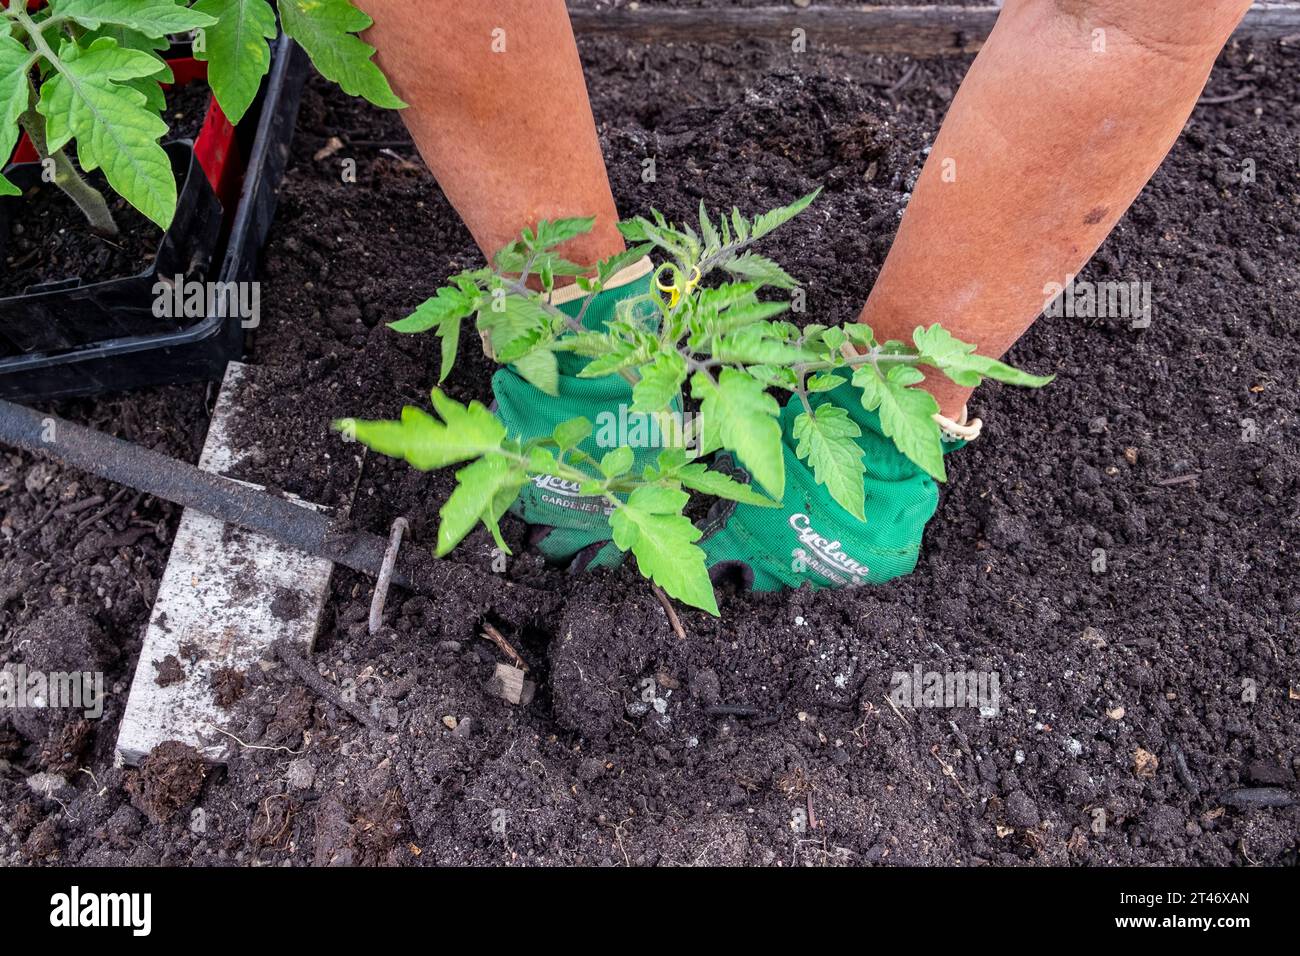 Planting out well hardened San Marzano tomato seedlings into a well-prepared garden bed with leaker hose irrigation network Stock Photo